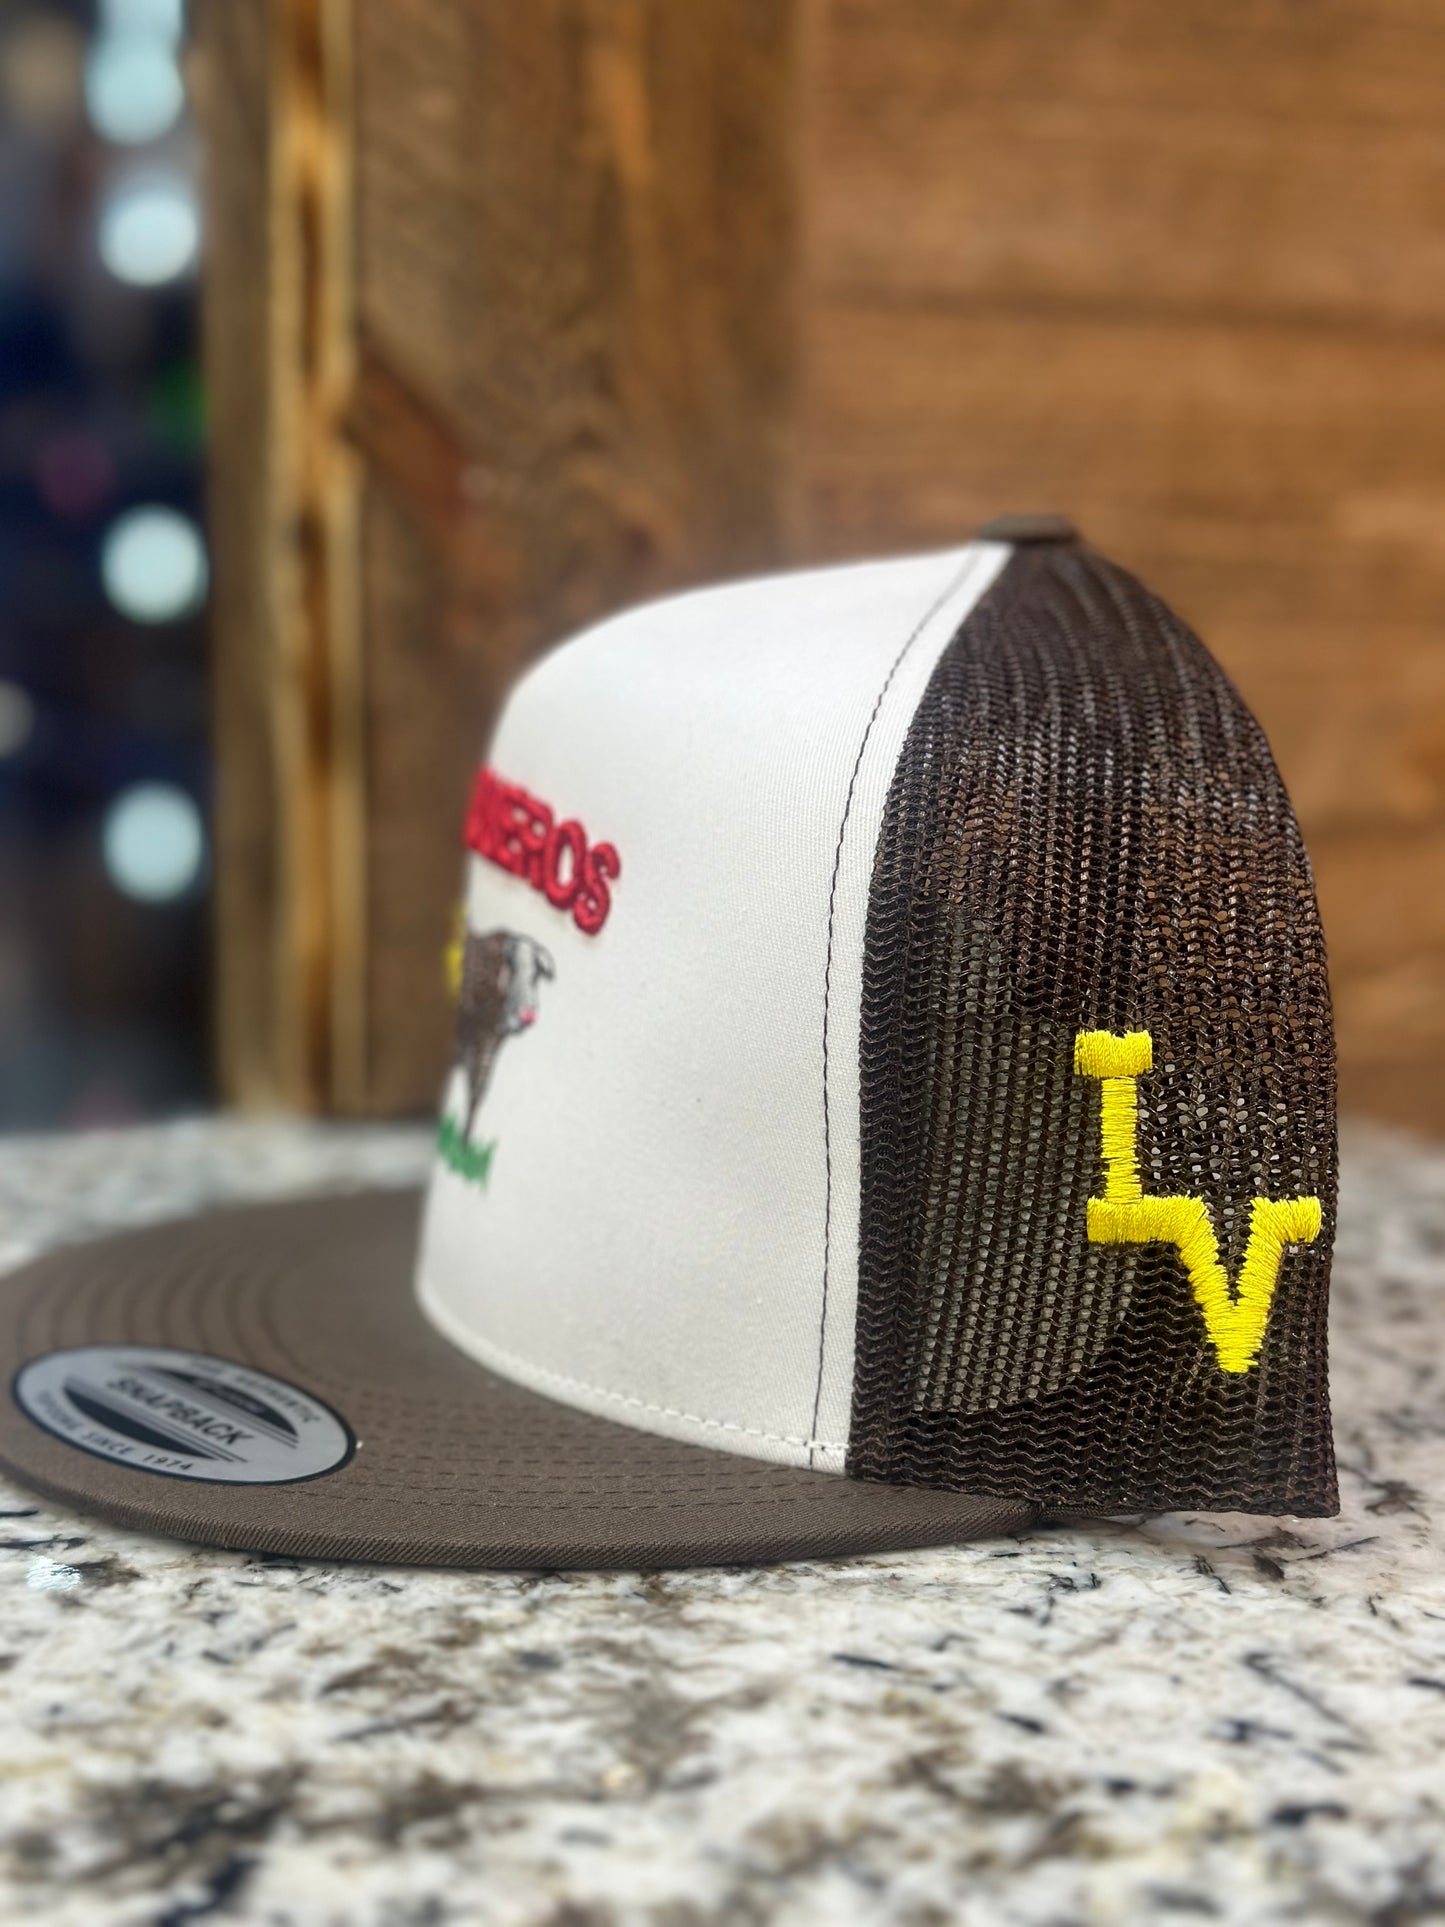 Los Vaqueros Hereford Snapback White/Brown With Yellow